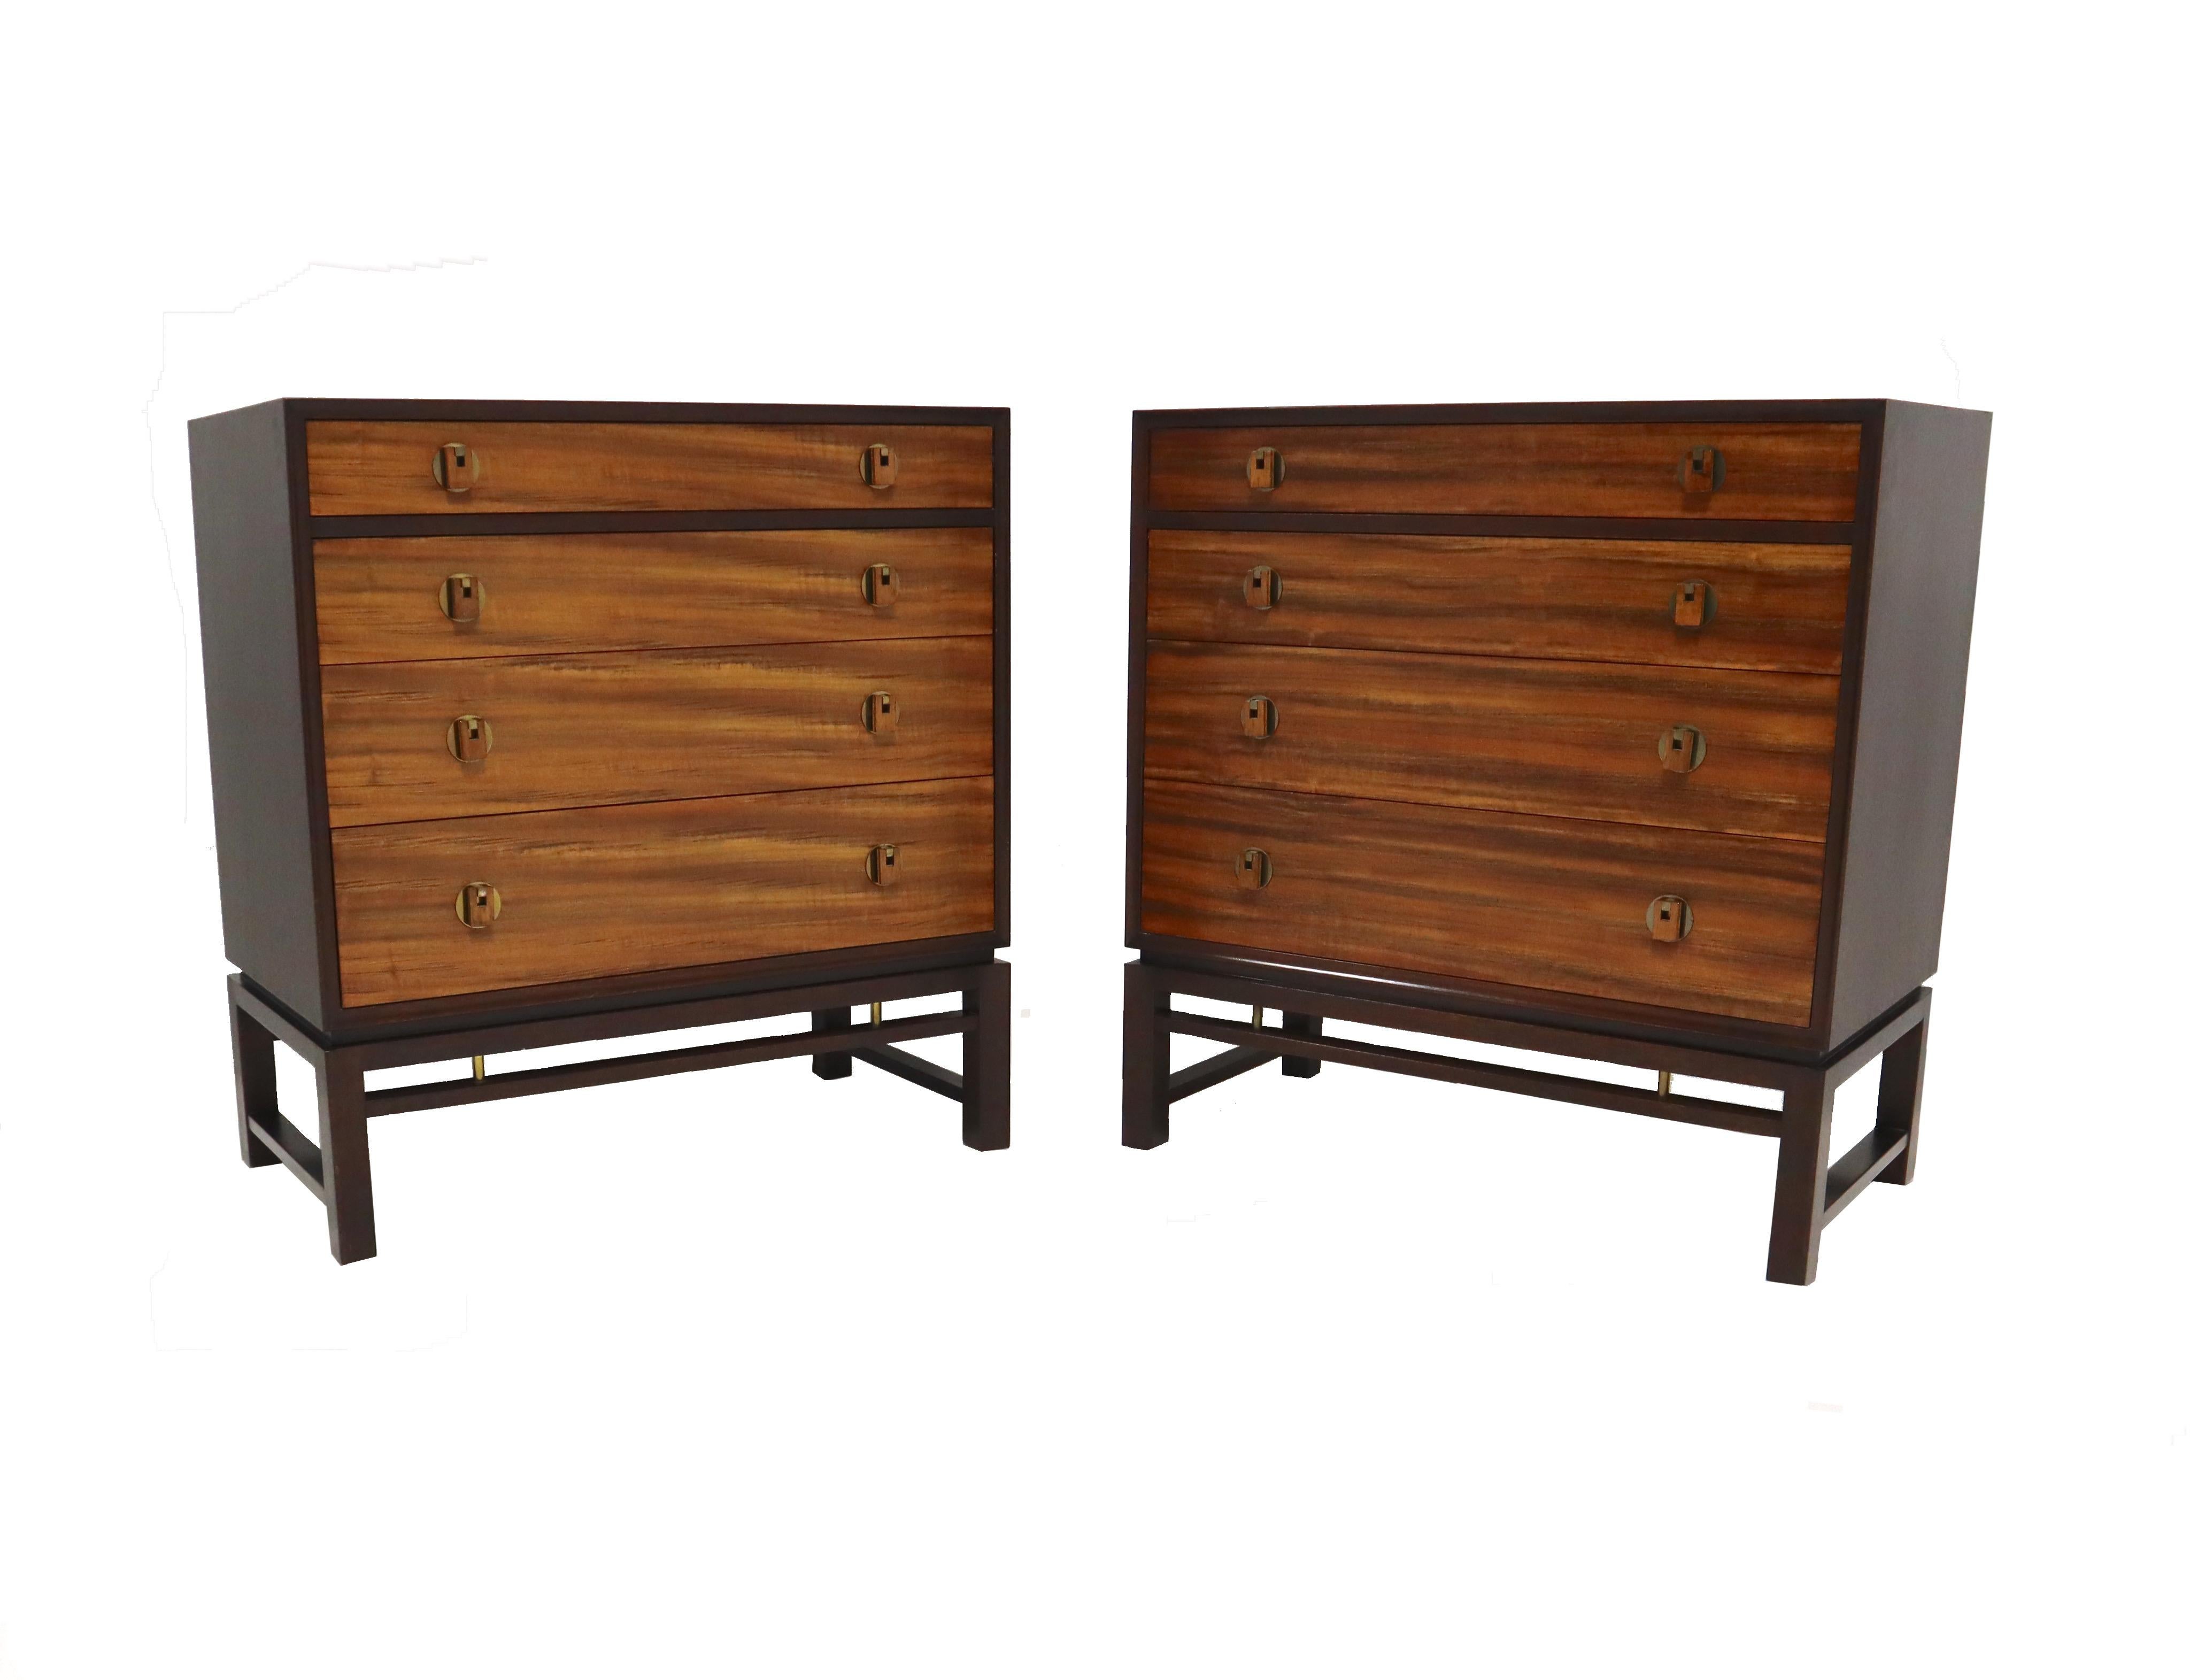 Pair of four-drawer chests by Edward Wormley for Dunbar. Espresso stained cases, walnut drawers, with rosewood and brass pulls.